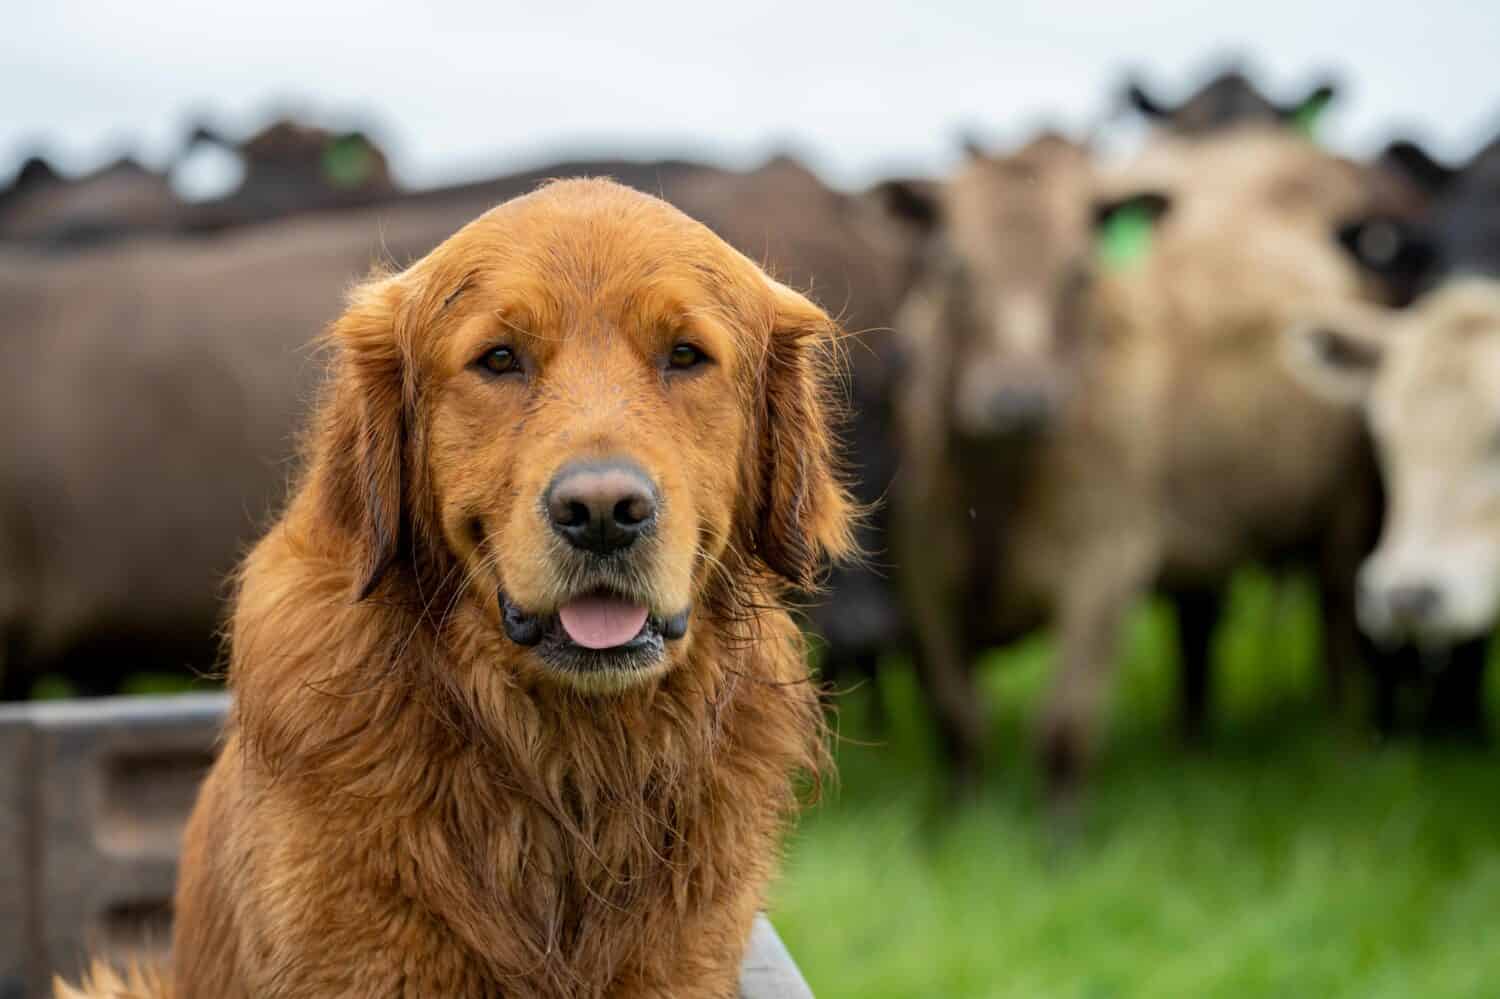 Golden retriever, sitting on a motorbike, with cows behind.